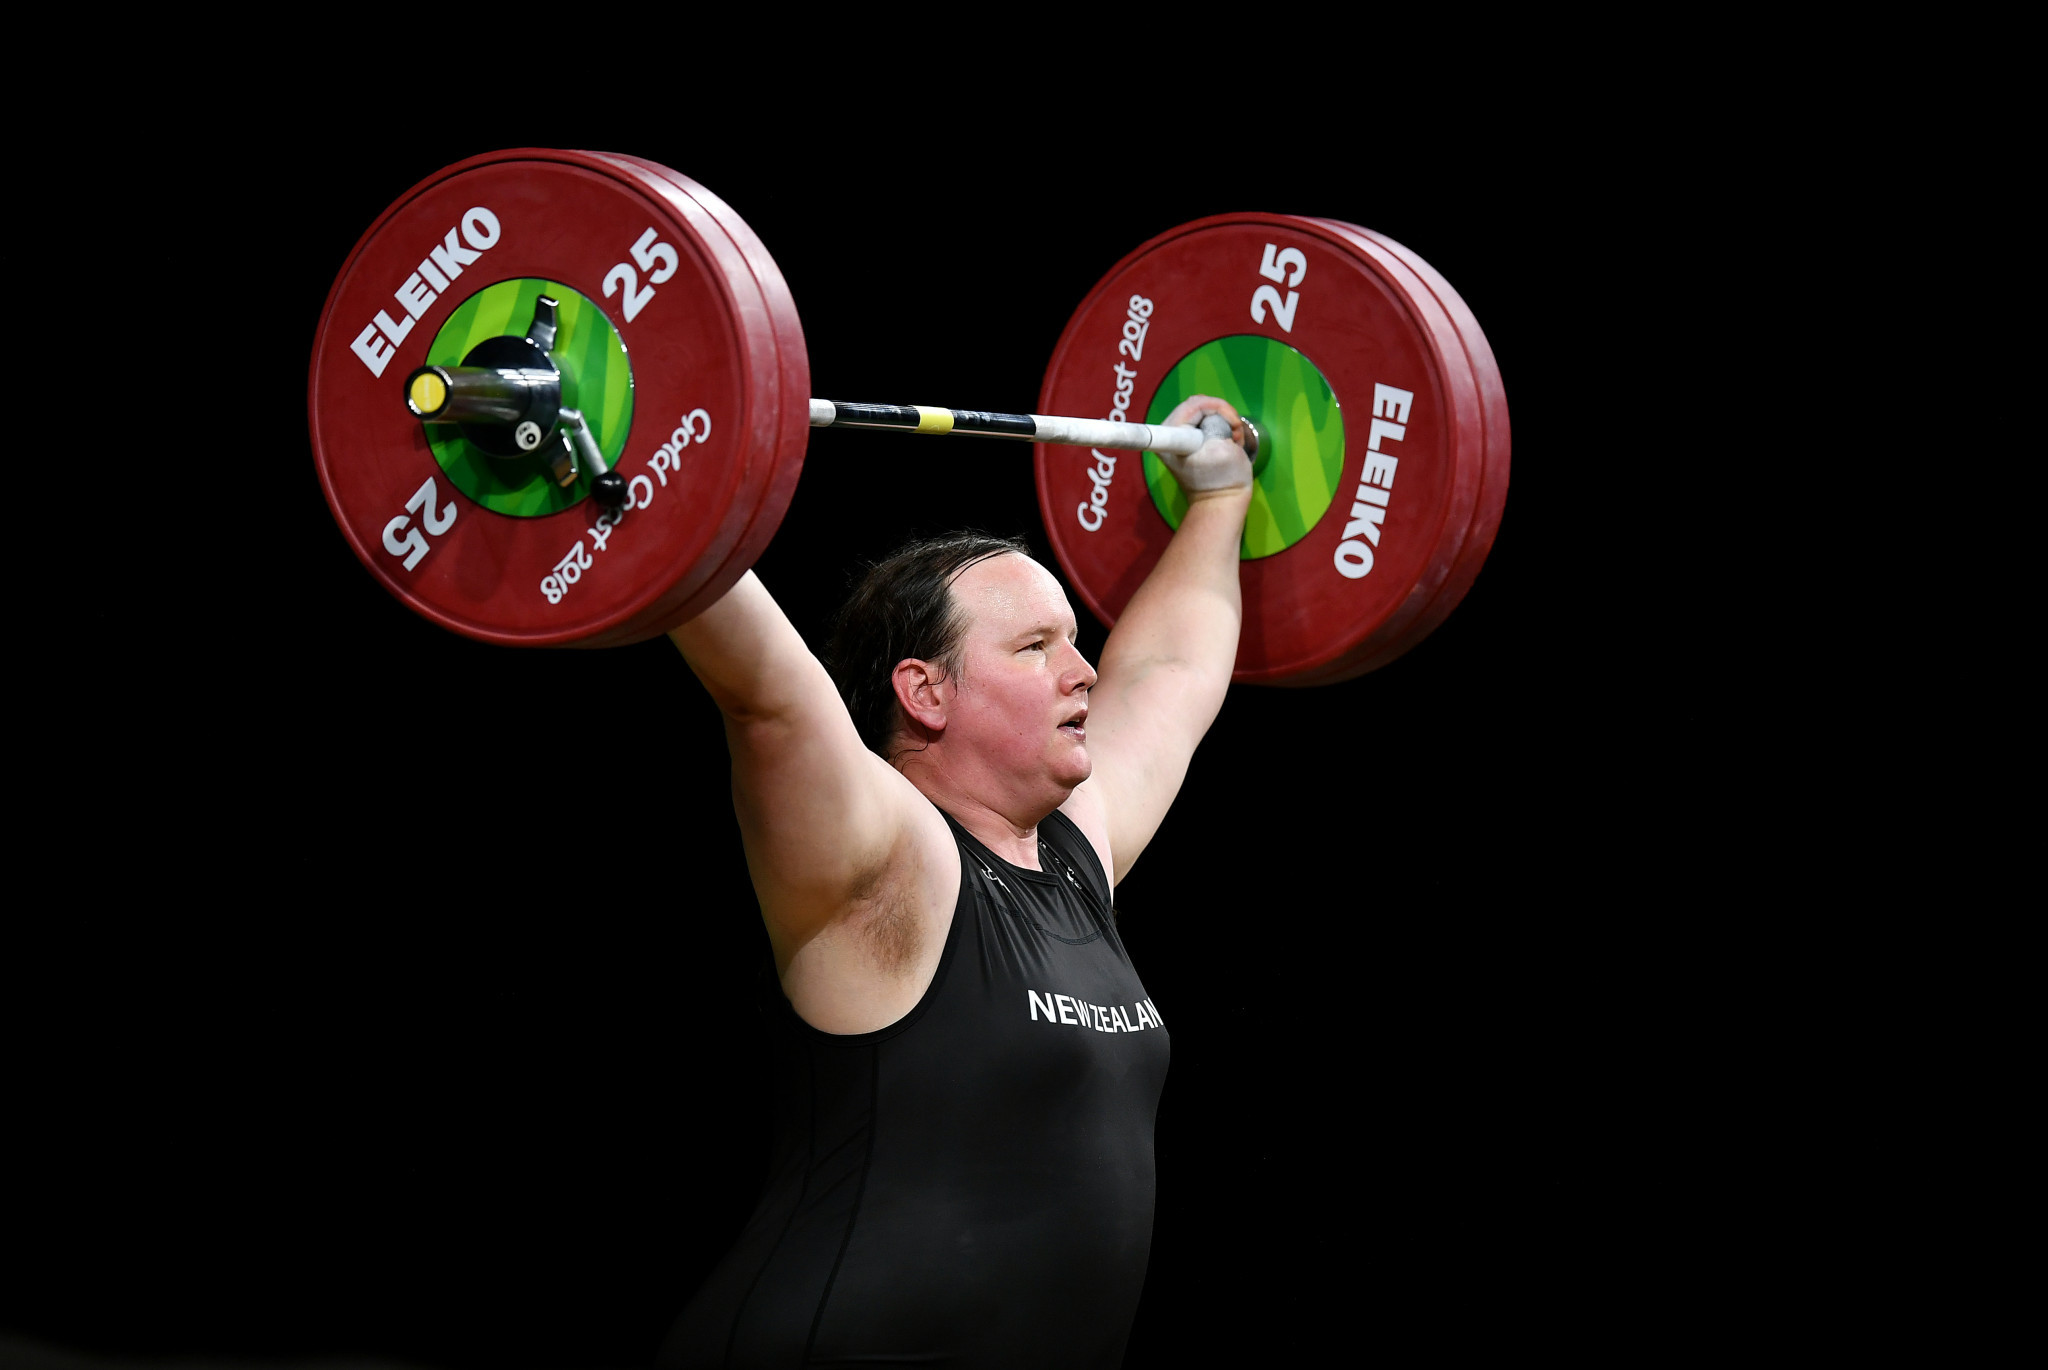 Weightlifter Laurel Hubbard is among the highest profile transgender athletes ©Getty Images